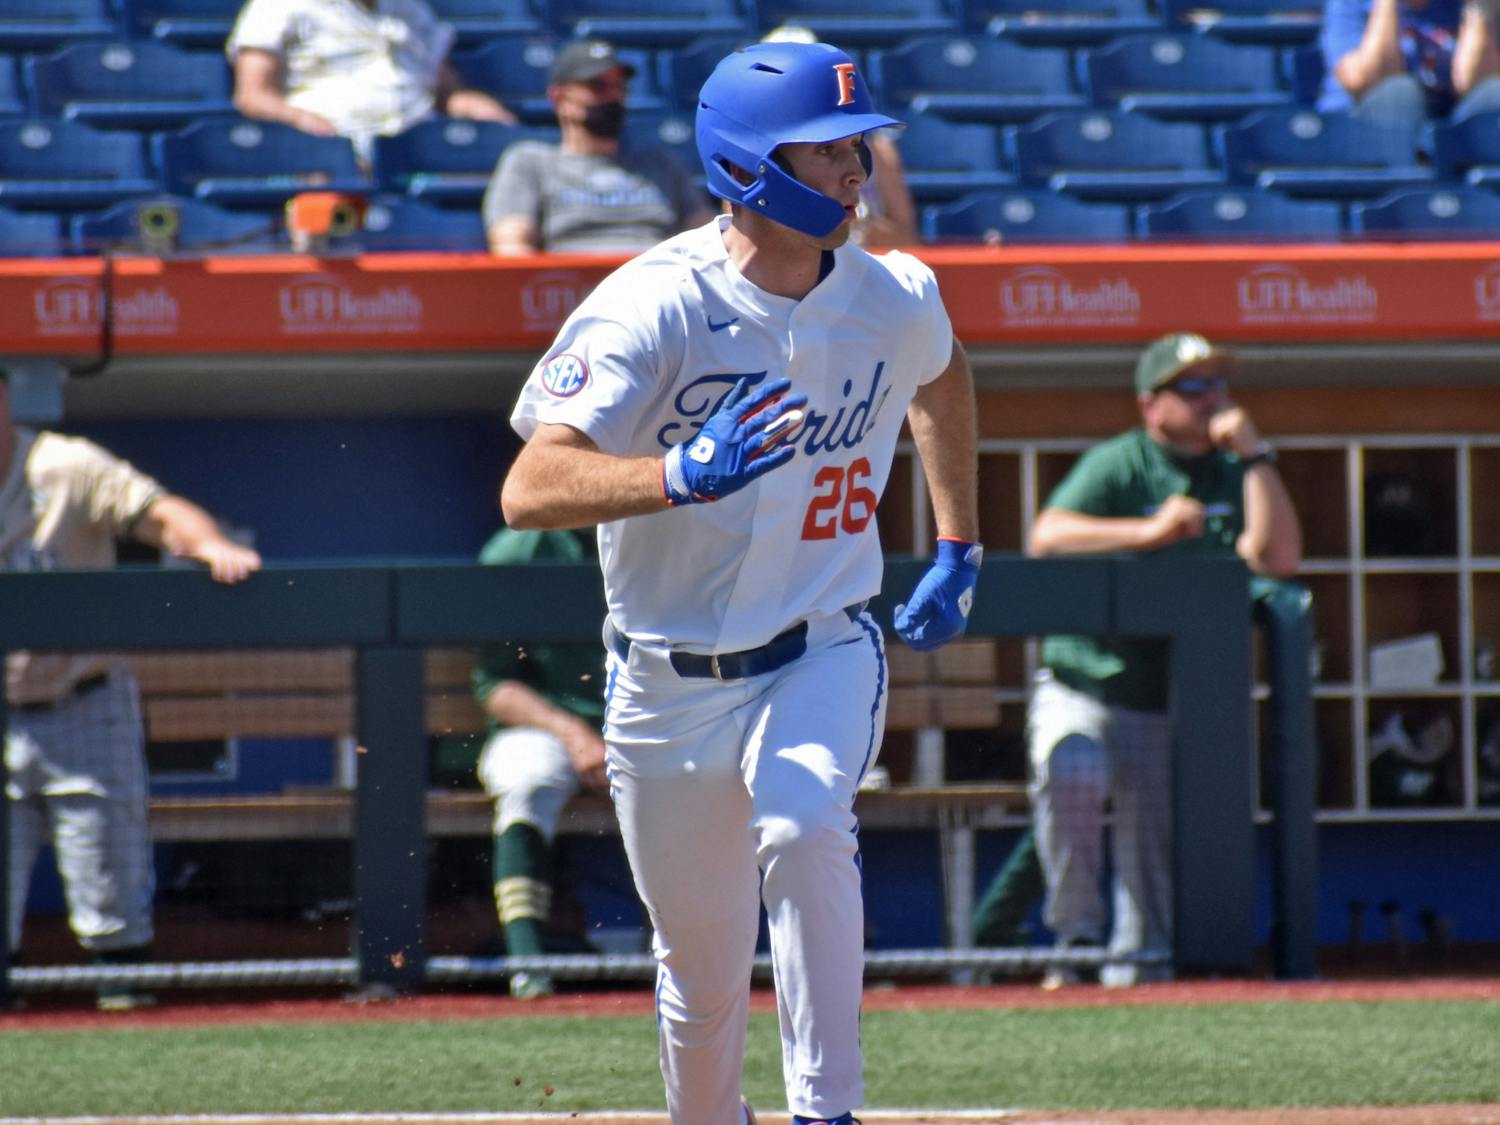 Florida&#x27;s Sterlin Thompson eyes a hit and runs down the first base line against Jacksonville on March 14, 2021. The Gators fell in the final matchup of a three-game series against South Carolina.